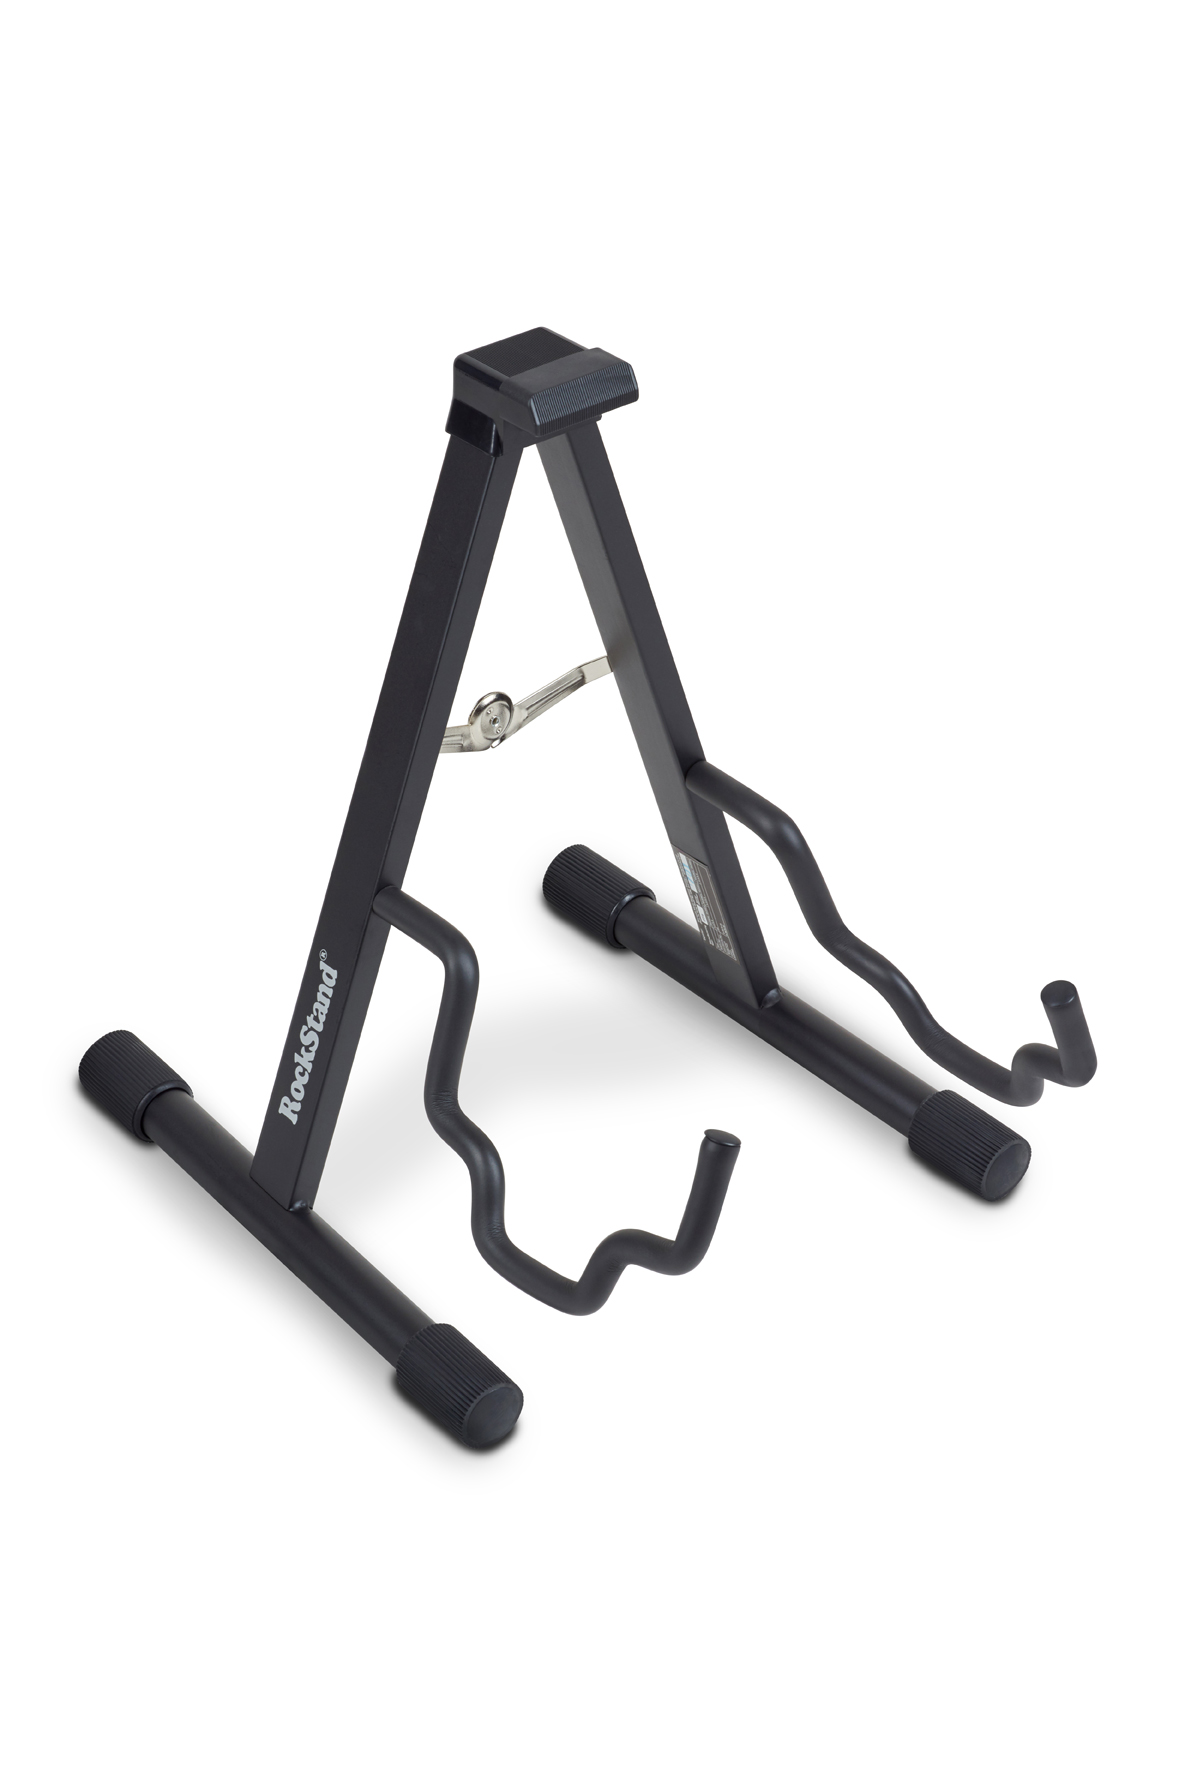 RockStand - Standard A-Frame Stand - for Acoustic & Electric Guitar / Bass